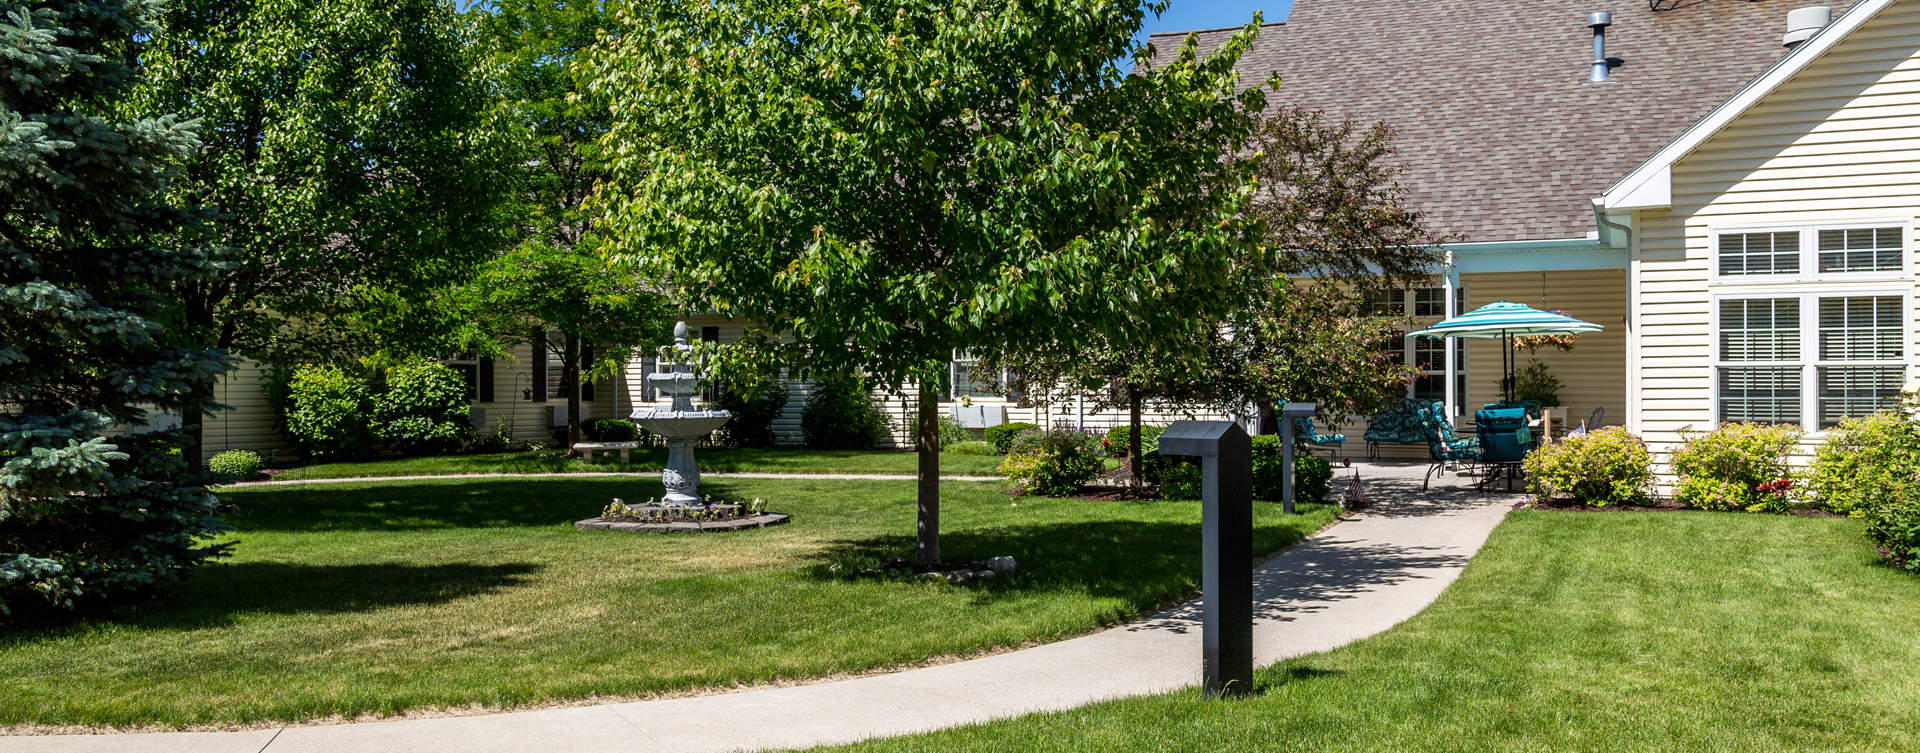 Enjoy the outdoors in a whole new light by stepping into our secure courtyard at Bickford of Okemos